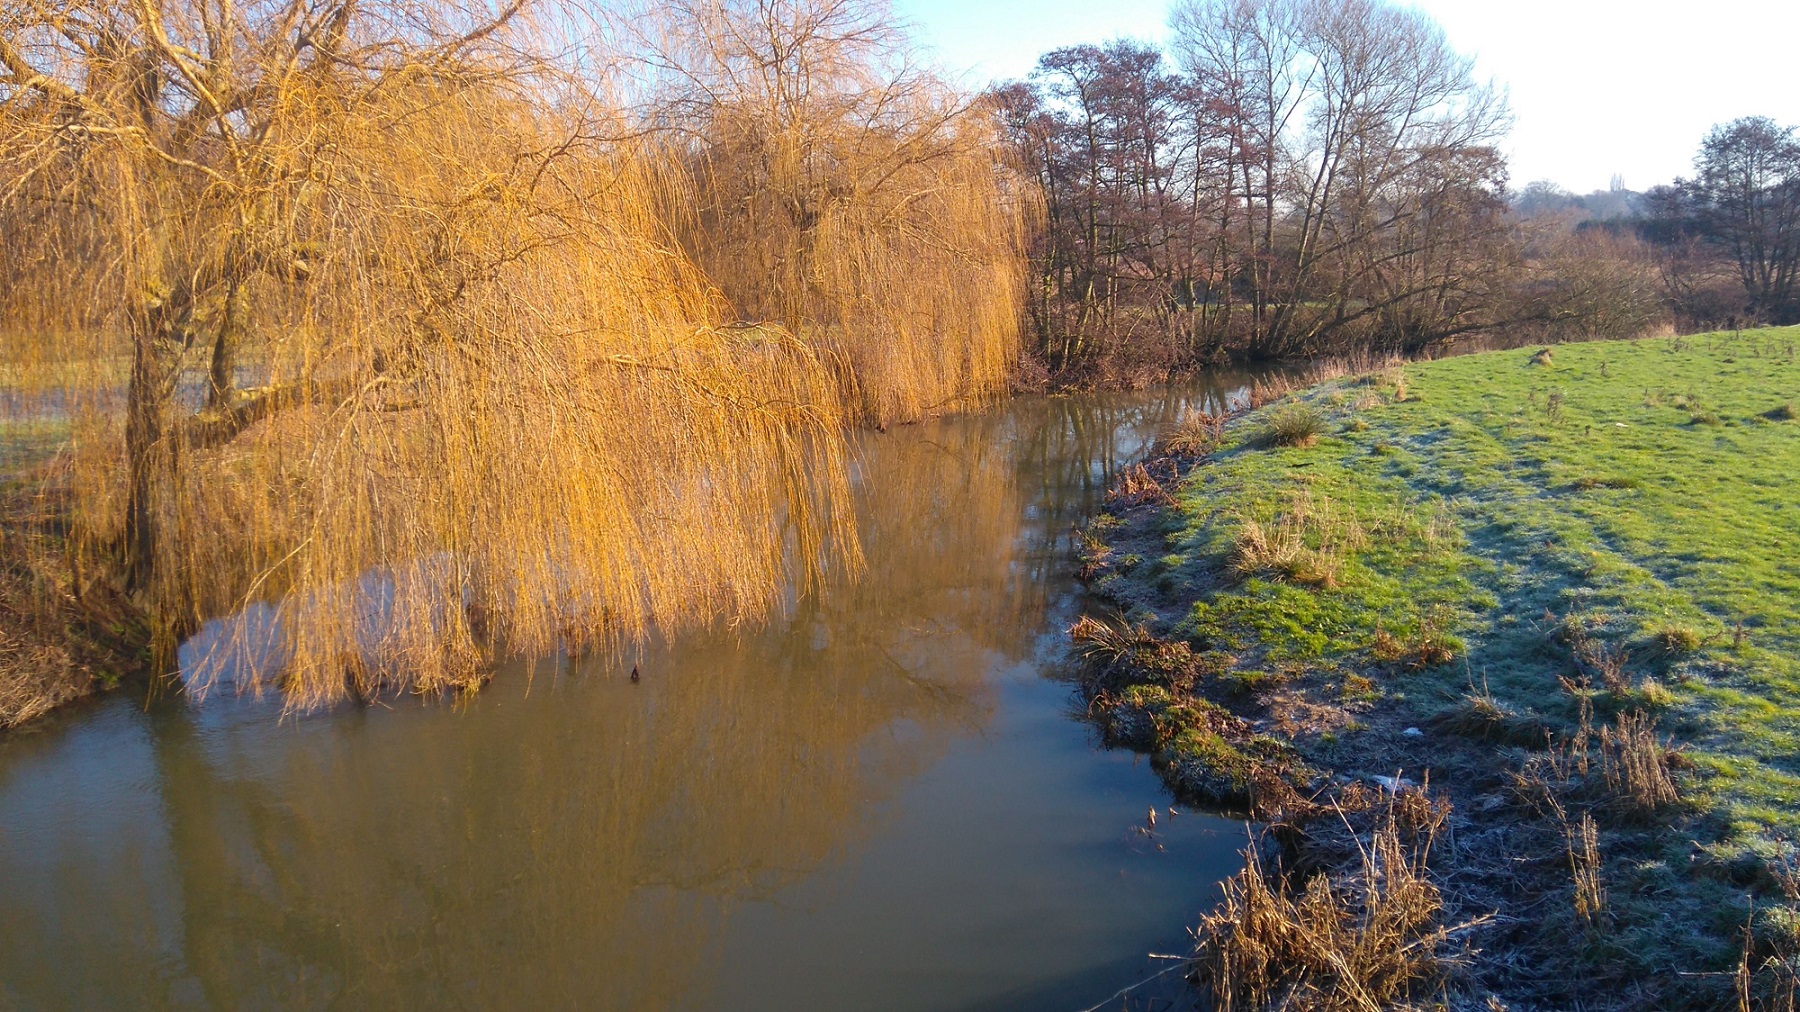 Bare willow trees glow golden in the winter sunshine as they drape across a small river. The grassy right bank of the river is frosty in the shaded patches.